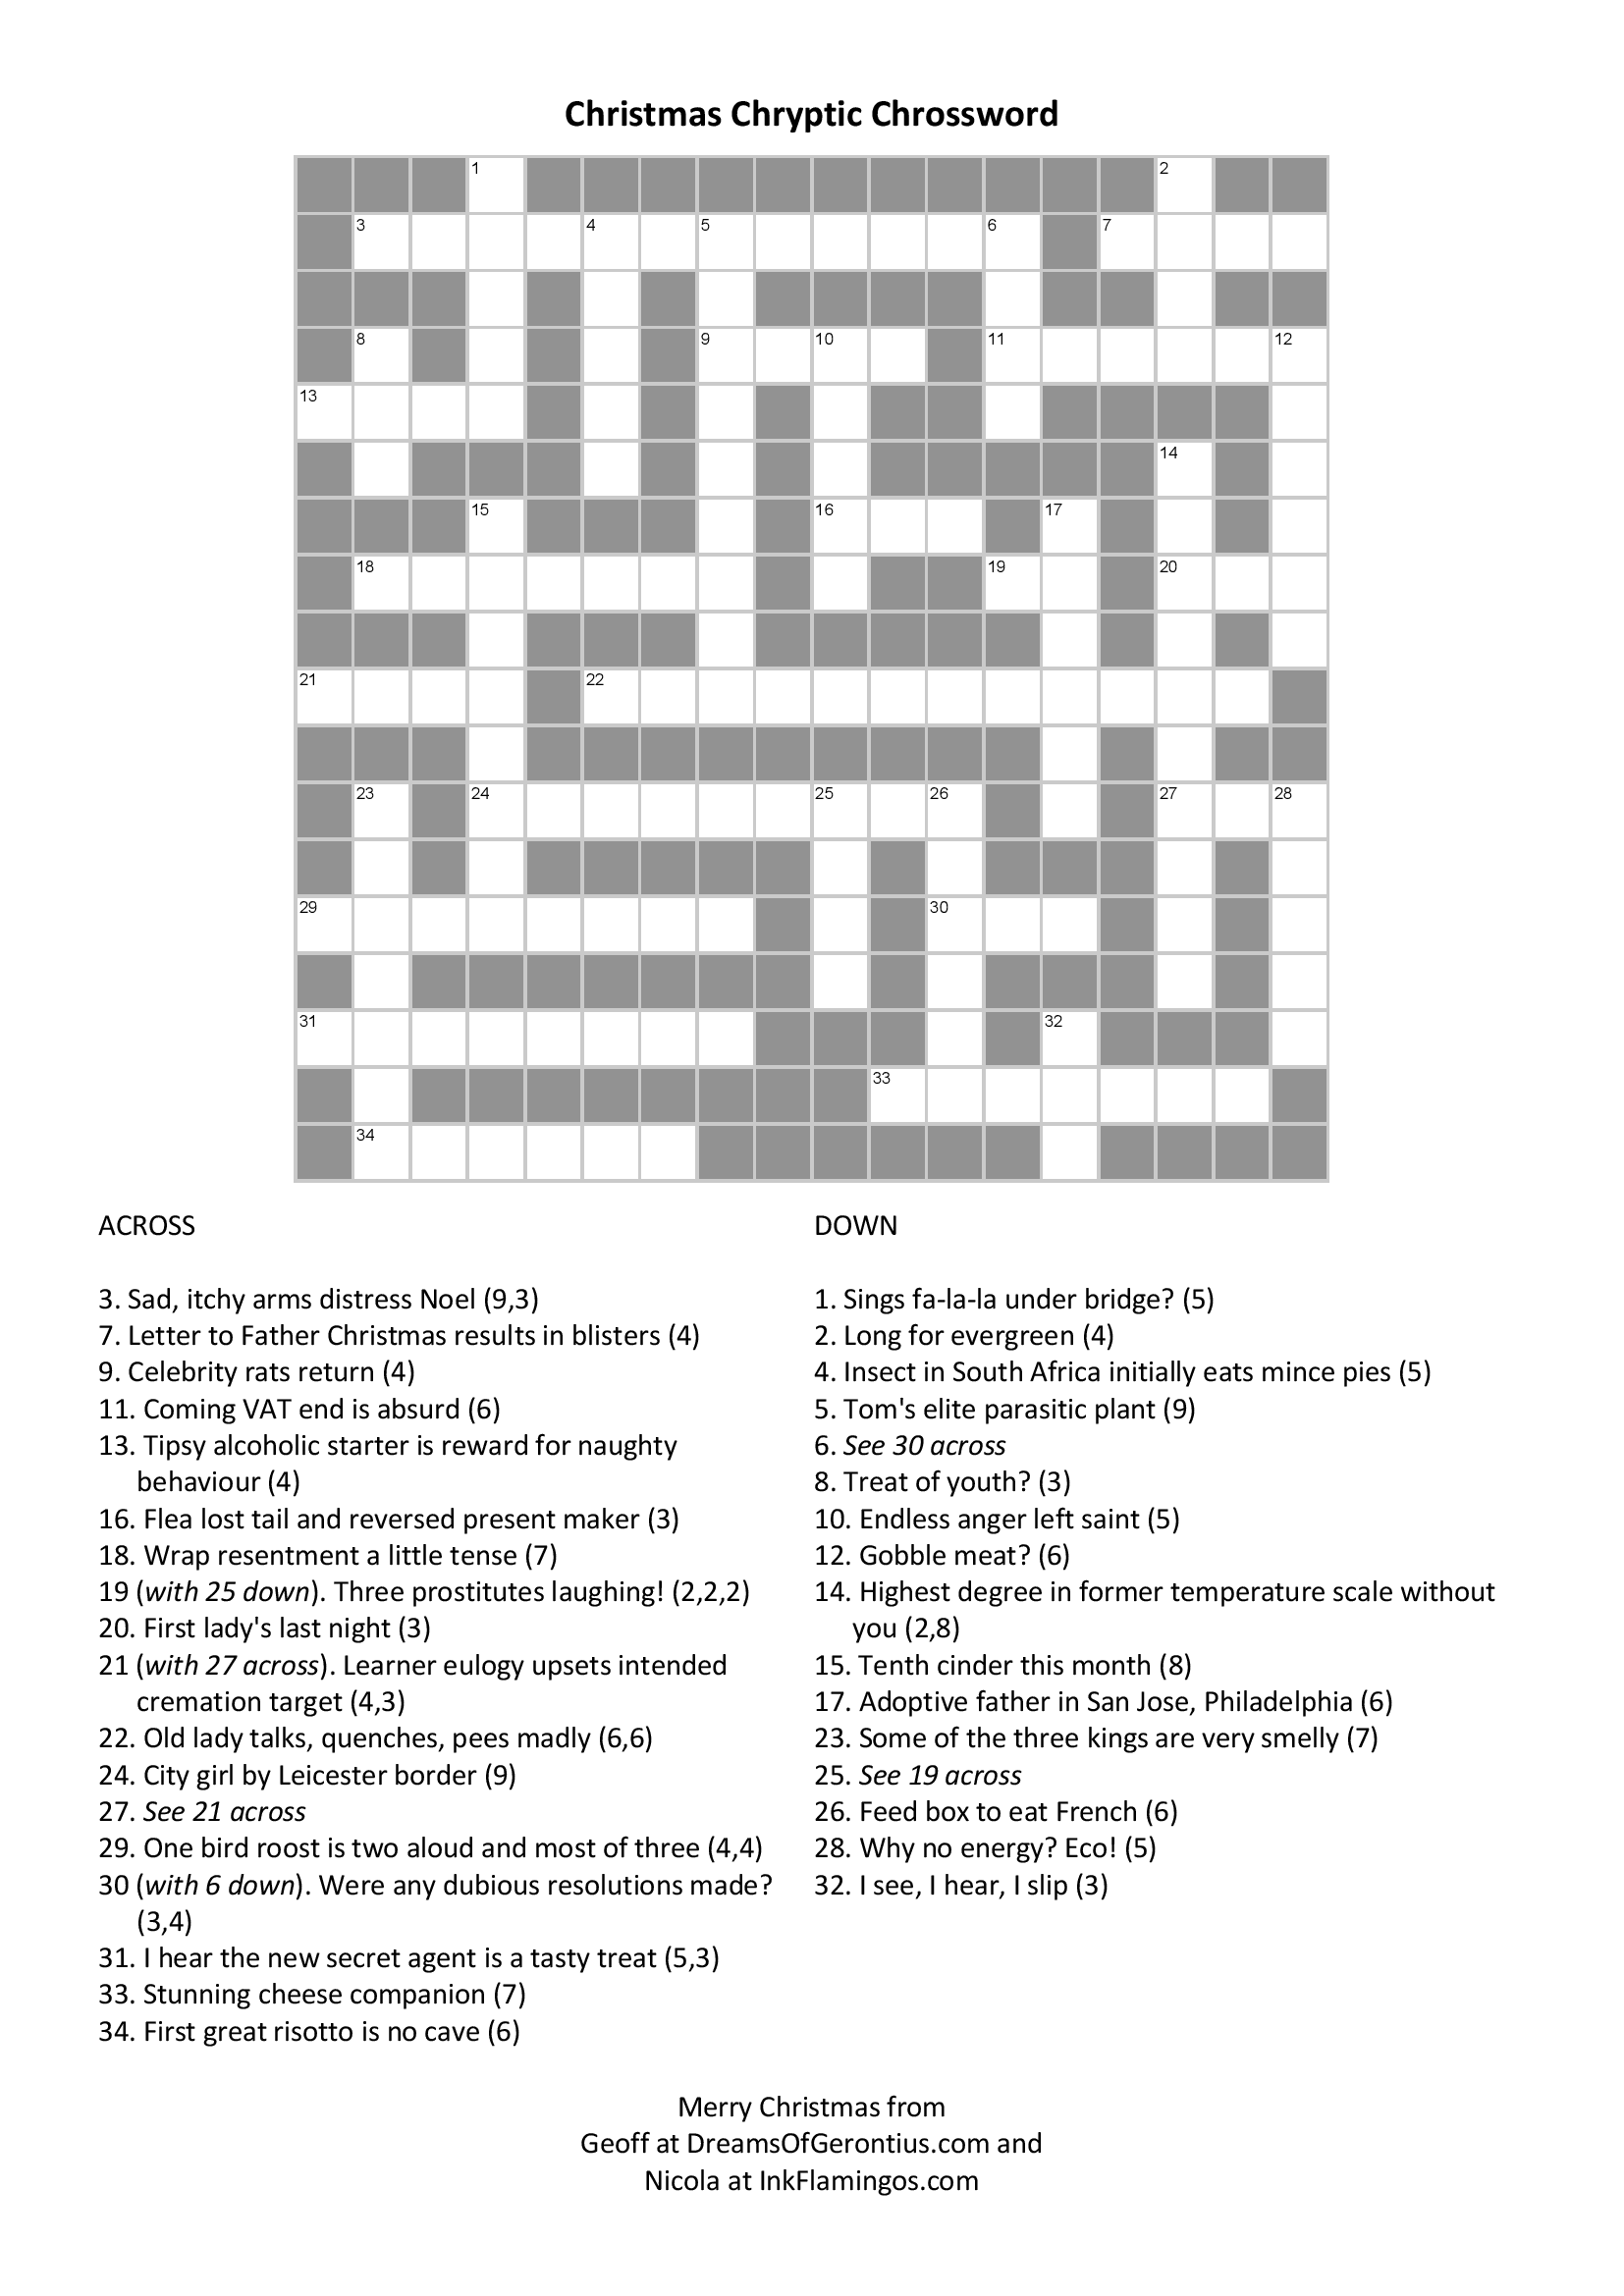 cryptic-crossword-primer-for-christmas-the-dreams-of-gerontius